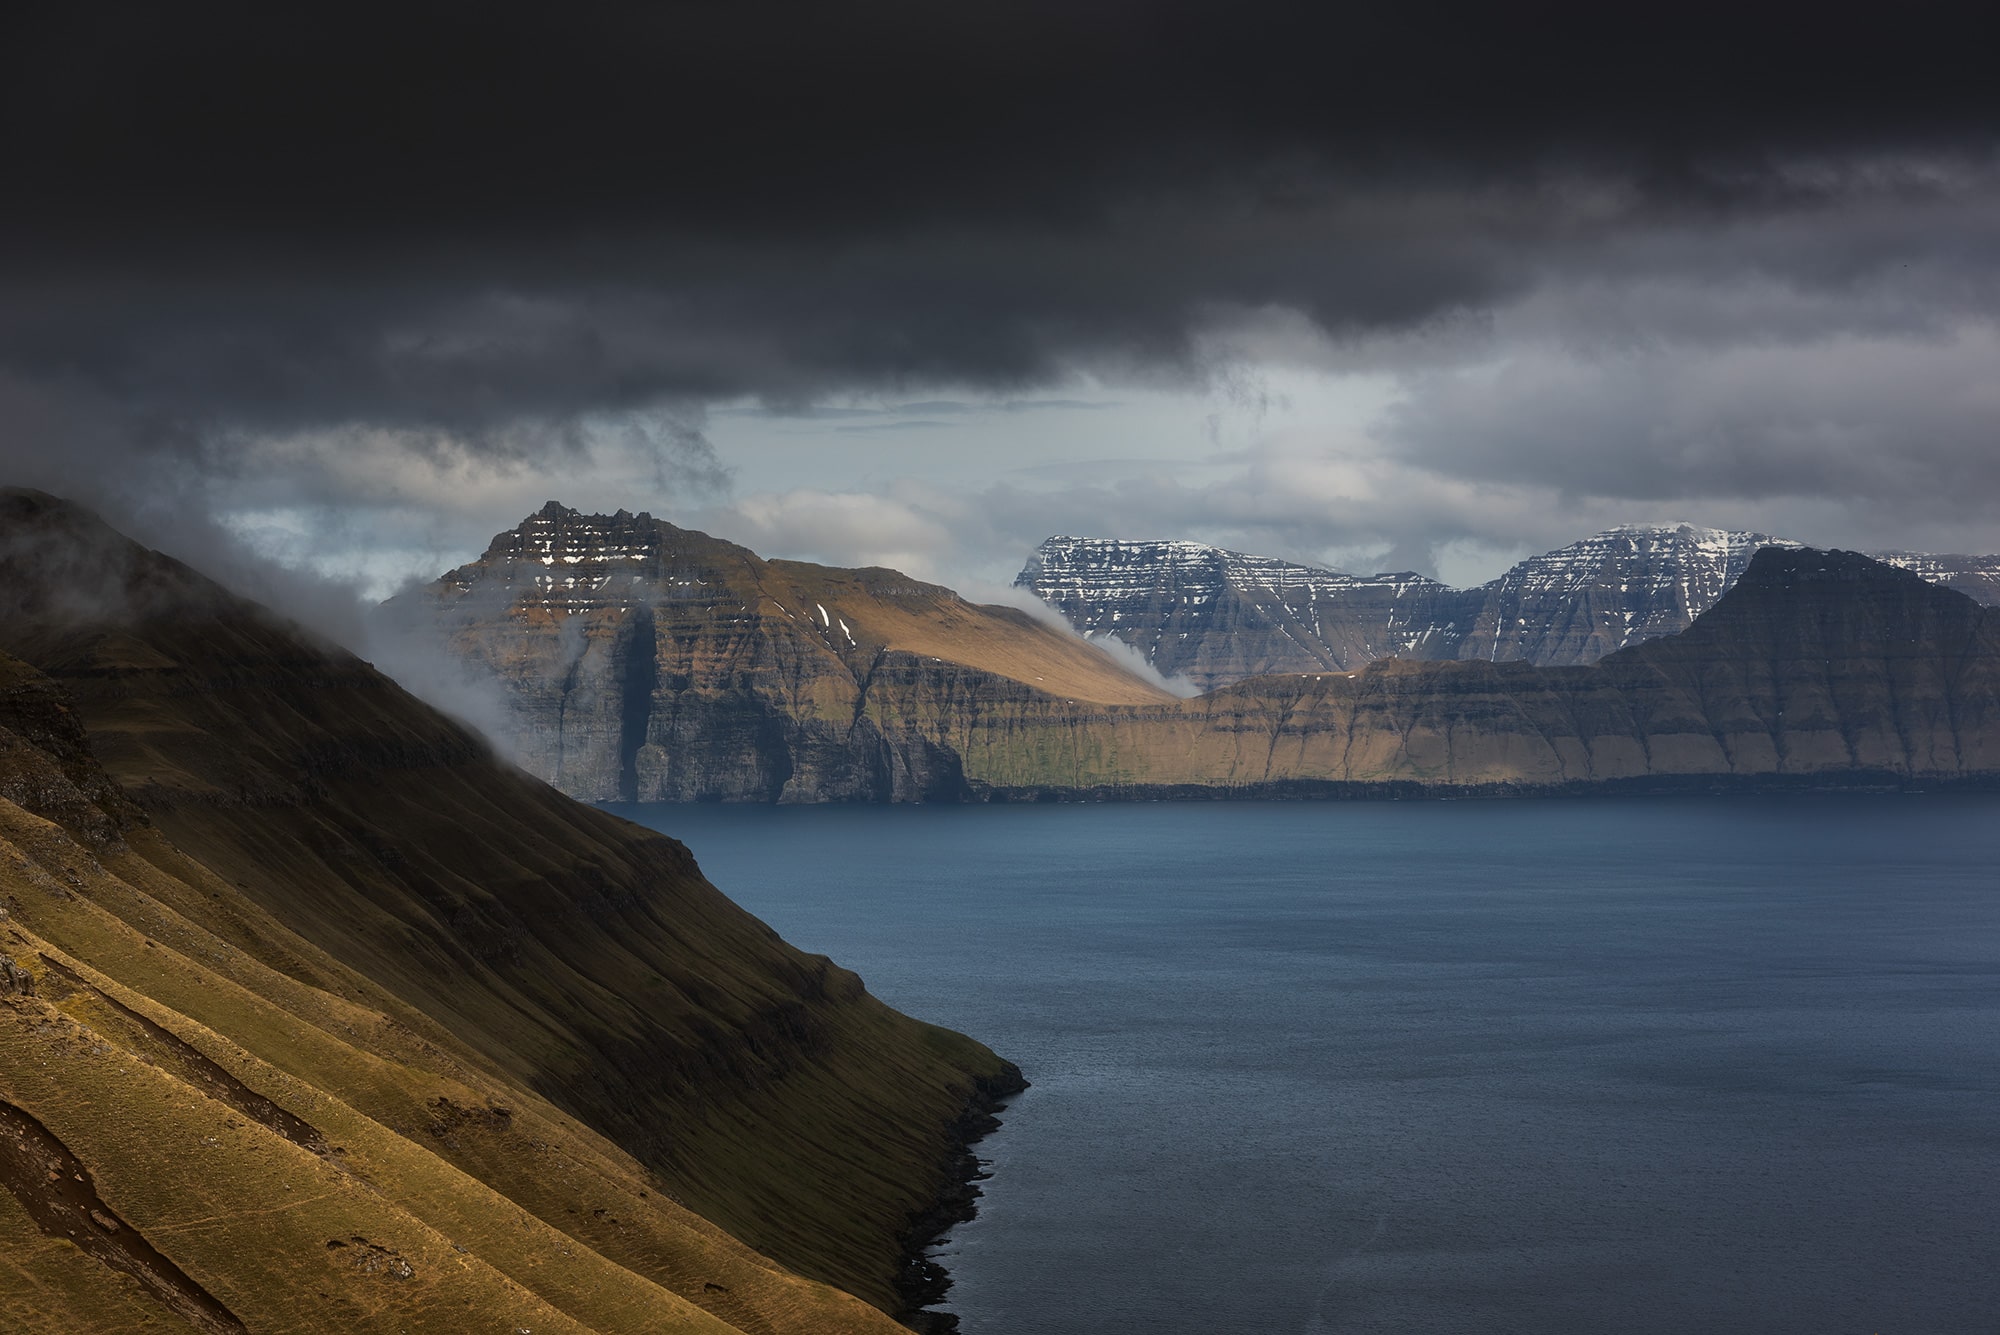 Embark on a visual journey through the captivating landscapes of the Faroe Islands with this stunning landscape photograph captured by Swiss travel photographer Jennifer Esseiva. Gaze upon the breathtaking view of Kalsoy Island from the Hvíthamar viewpoint, immersing yourself in the raw beauty of the Faroe Islands. This mesmerizing image encapsulates the rugged charm and serene allure of the archipelago's landscapes. Experience the magic of Faroese scenery through Jennifer Esseiva's lens, where every frame tells a story of nature's grandeur. Discover the timeless beauty of the Faroe Islands in this evocative landscape photograph.